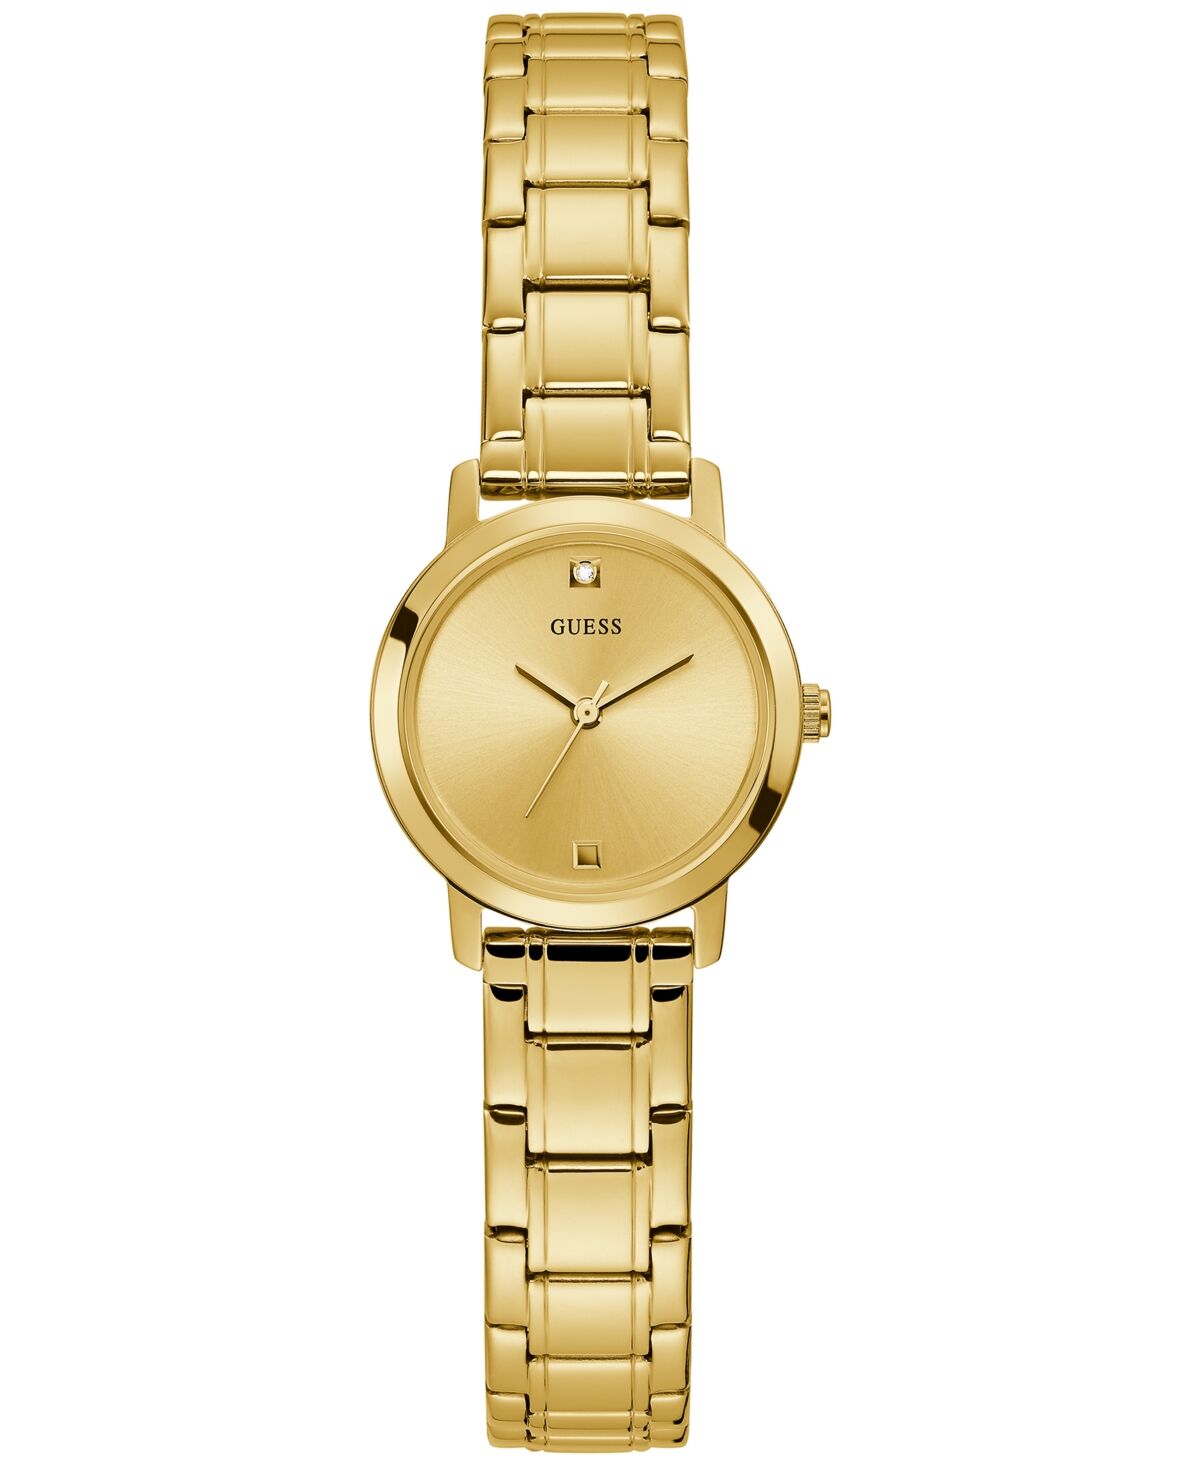 Guess Women's Diamond-Accent Gold-Tone Stainless Steel Bracelet Watch 25mm - Gold-tone